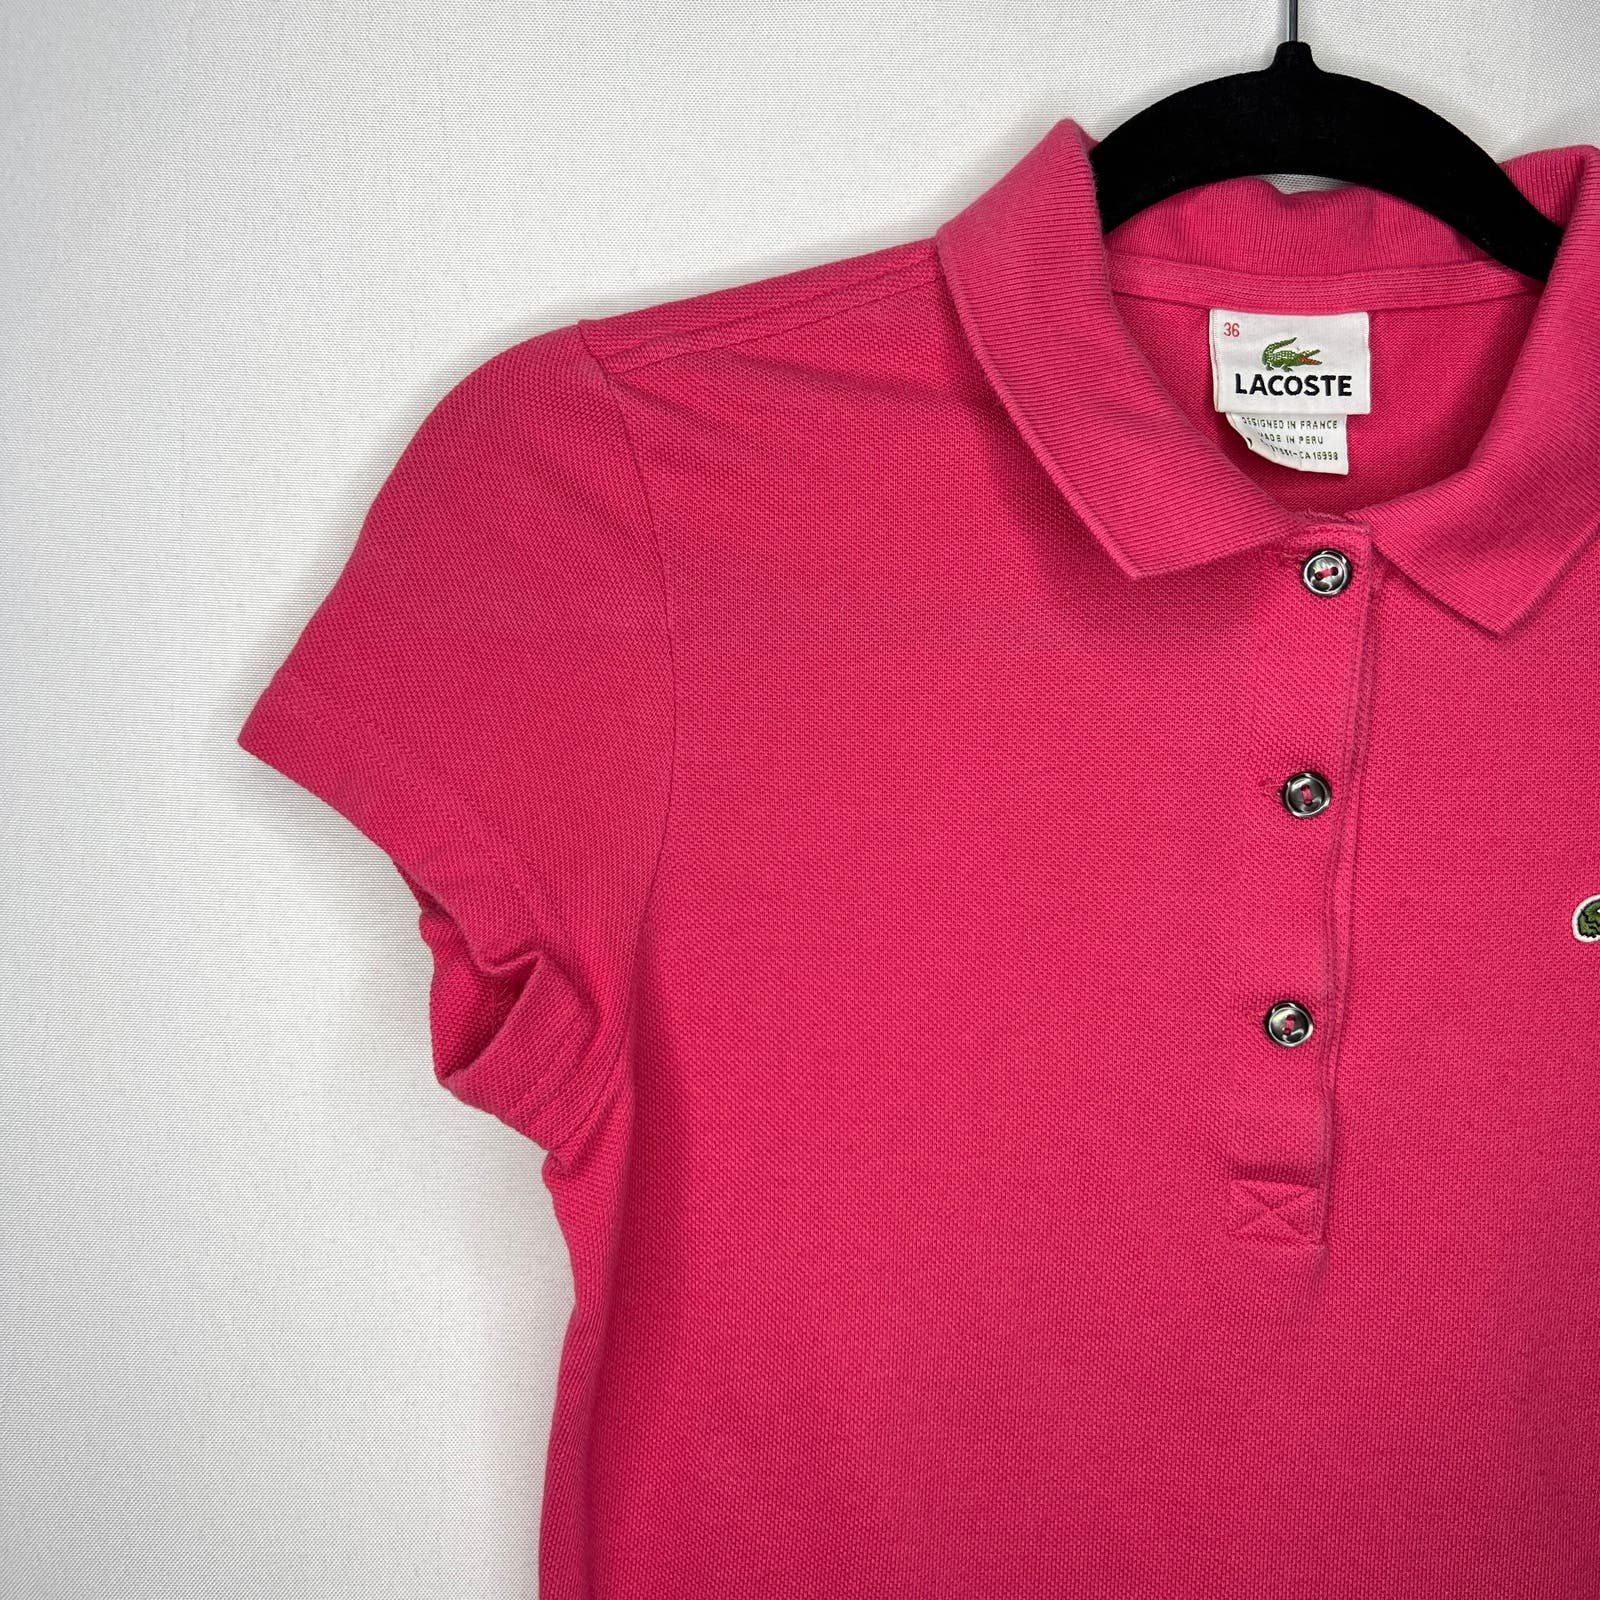 cheapest place to buy  LACOSTE Women´s Short Sleeve Polo Shirt Top 36 Small Pink pECwDoWiI best sale